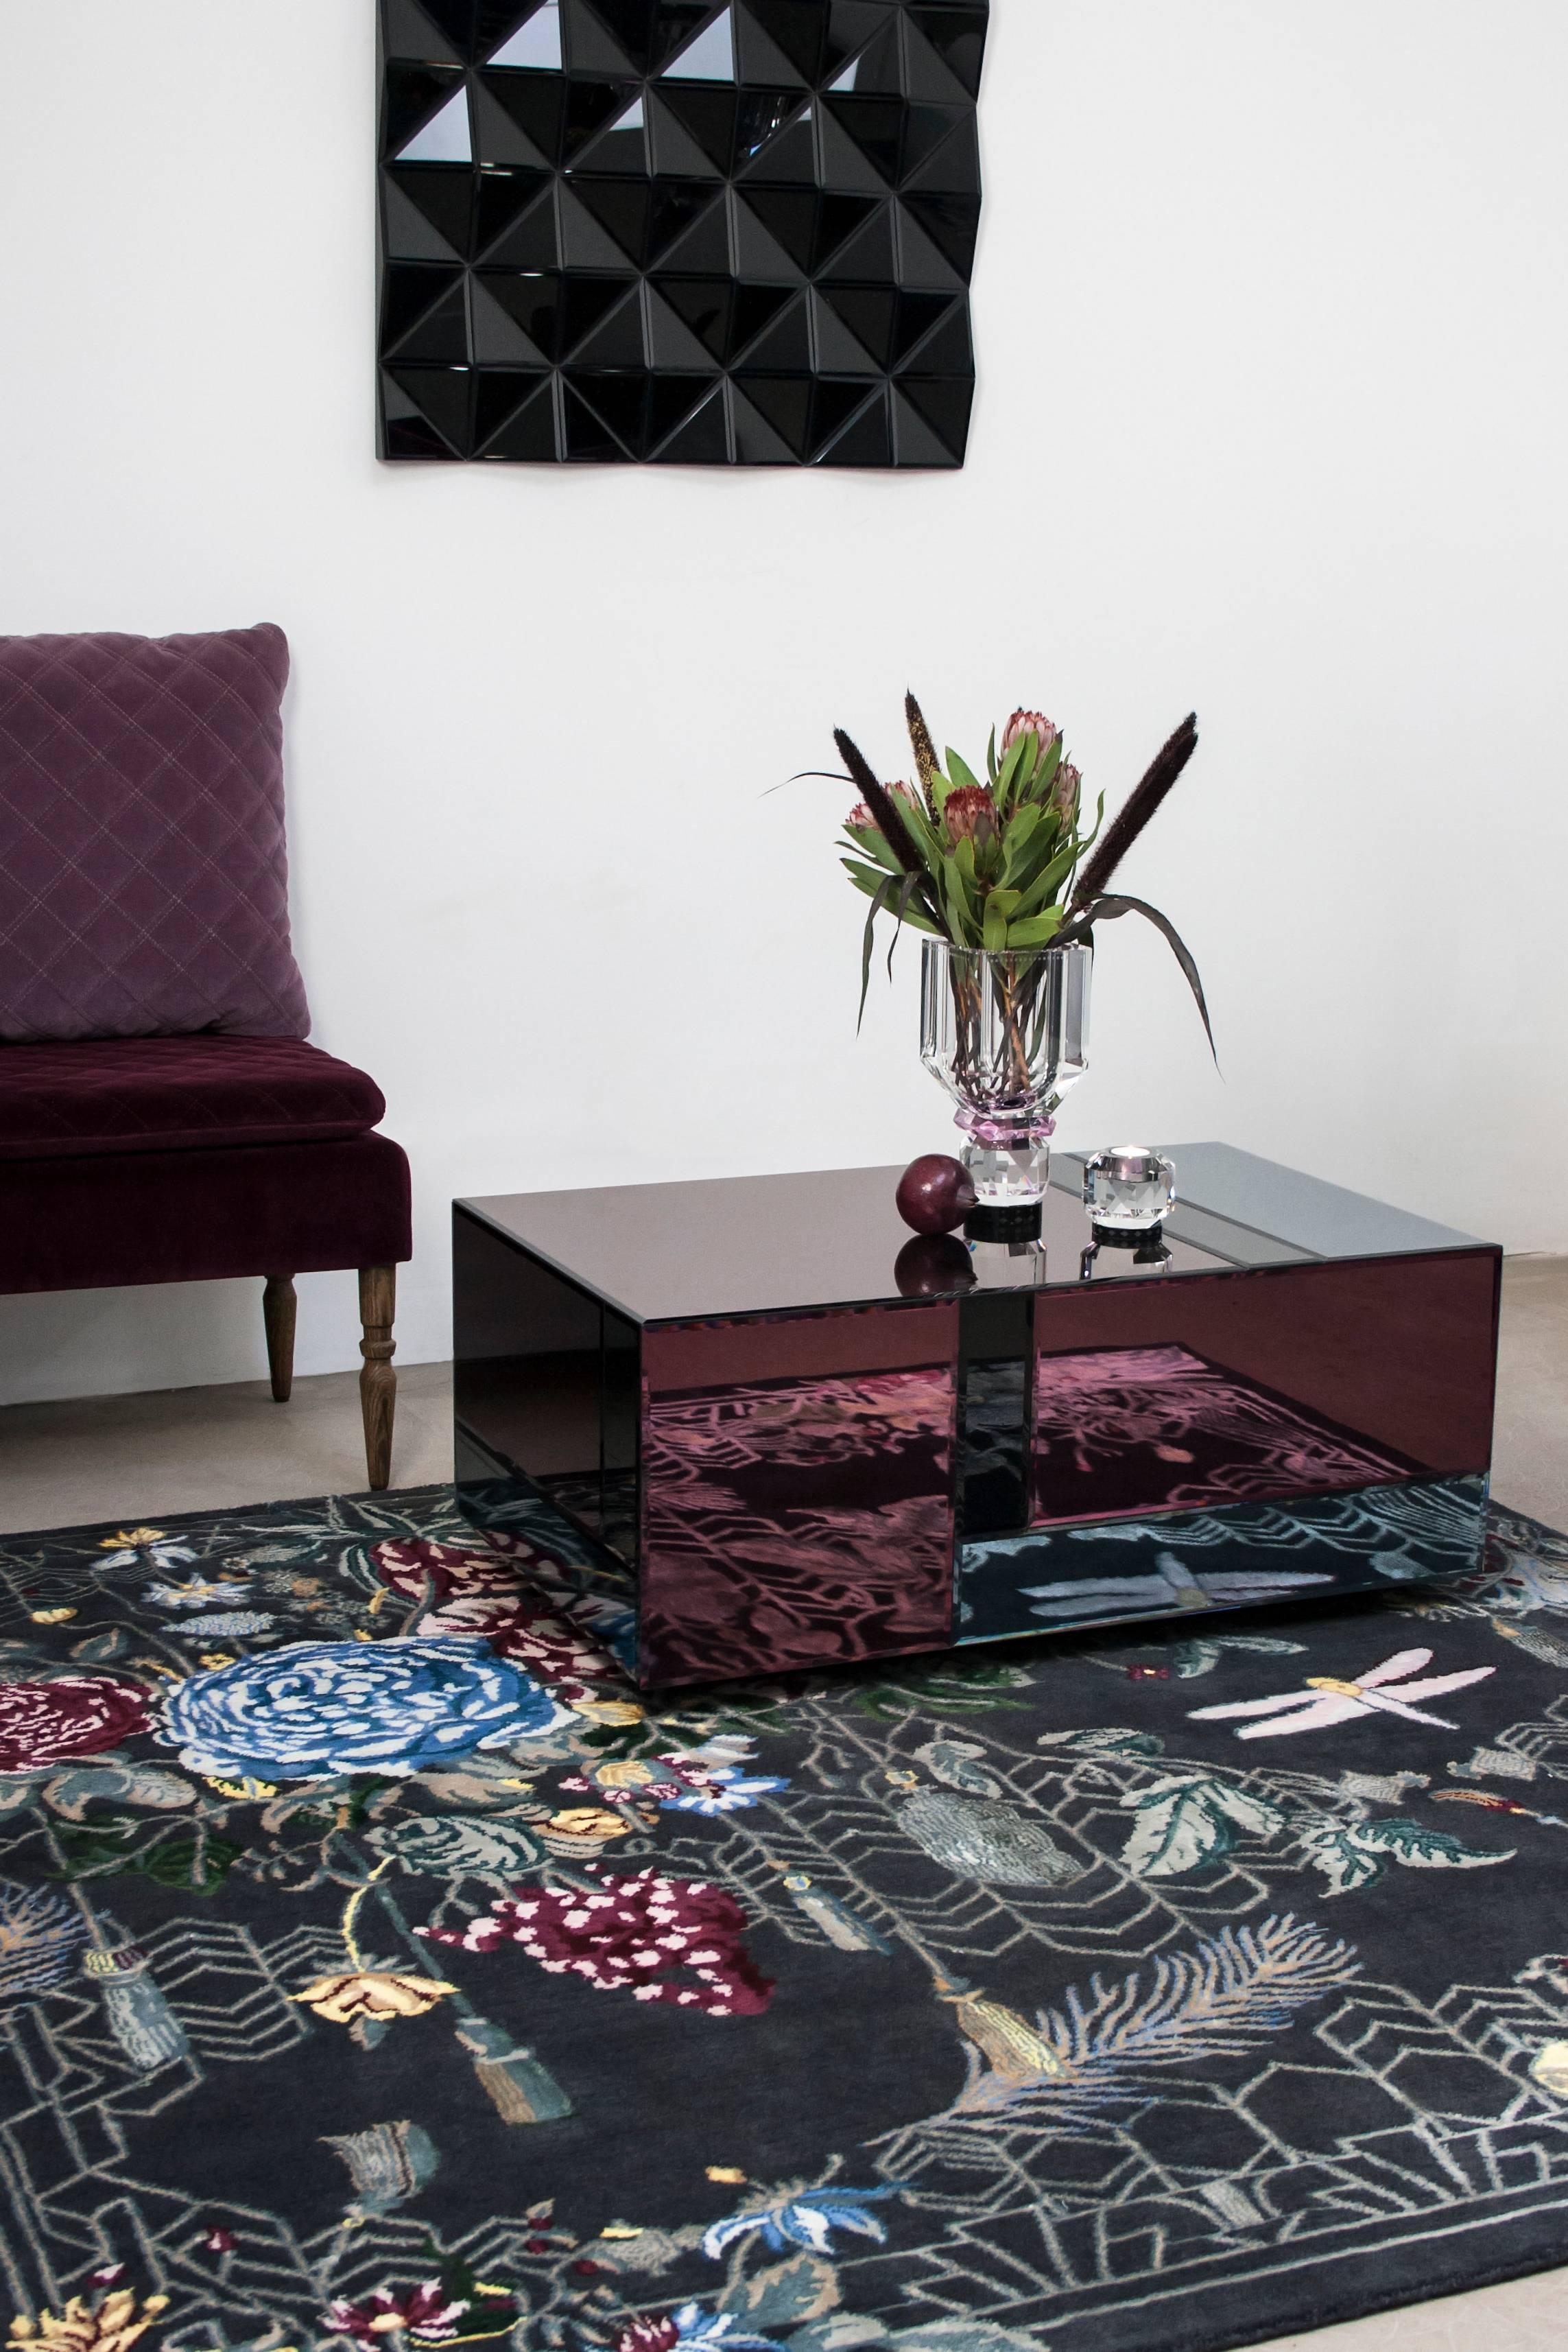 Escape flowers
Hand-knotted rug
Hand-knotted with 140.000 knots per sqm.
50% silk - 50% New Zealand wool
Measures: L 180 x H 180 cm

Enjoy the luxury of this fine hand knotted rug from Reflections Copenhagen. Truly a handmade work of art. The